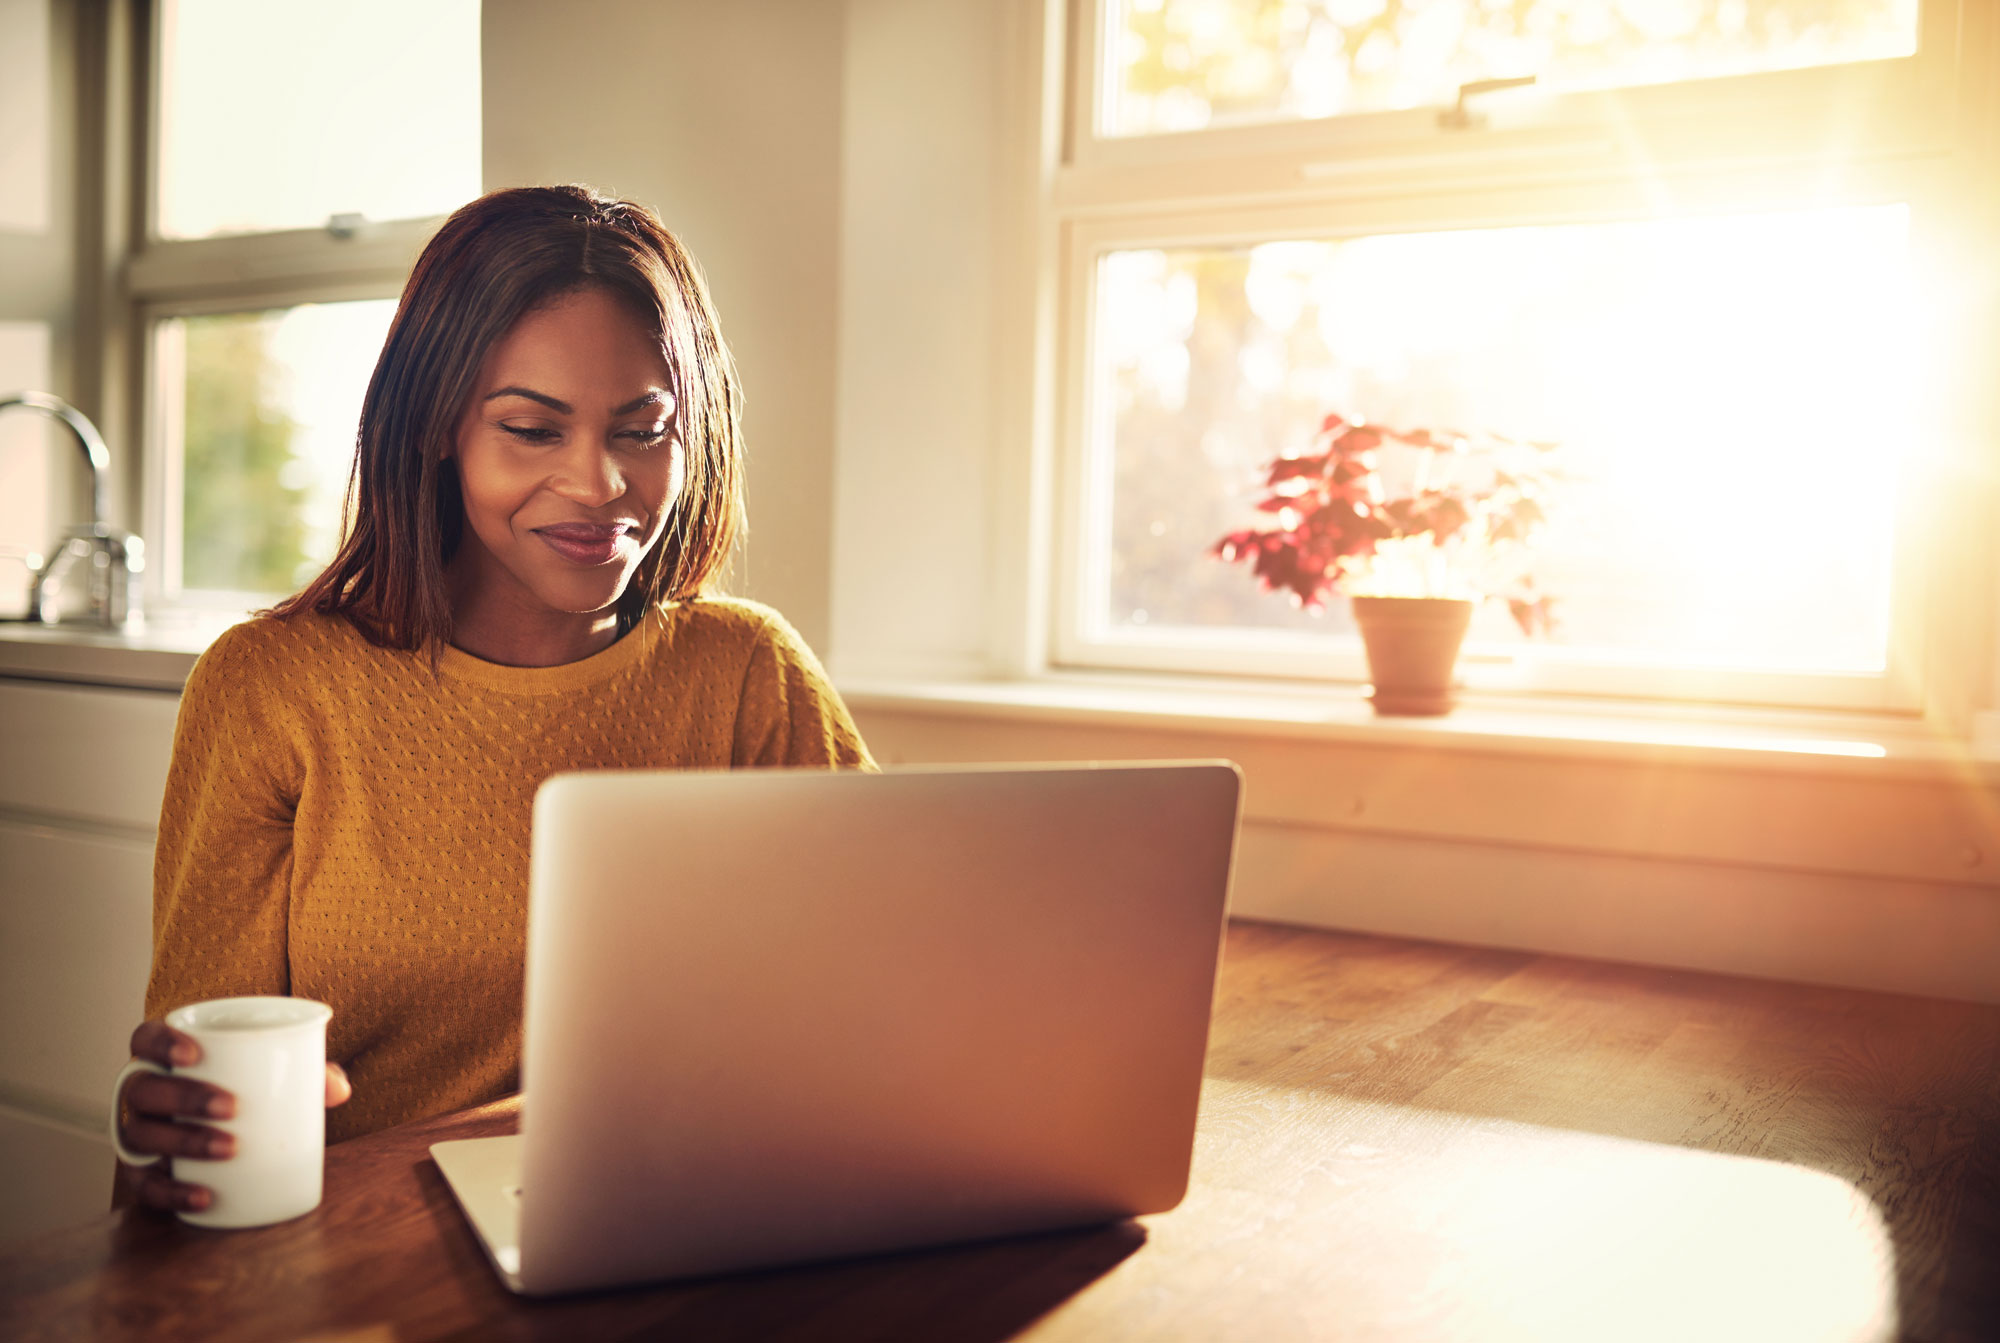 A woman smiling on a laptop